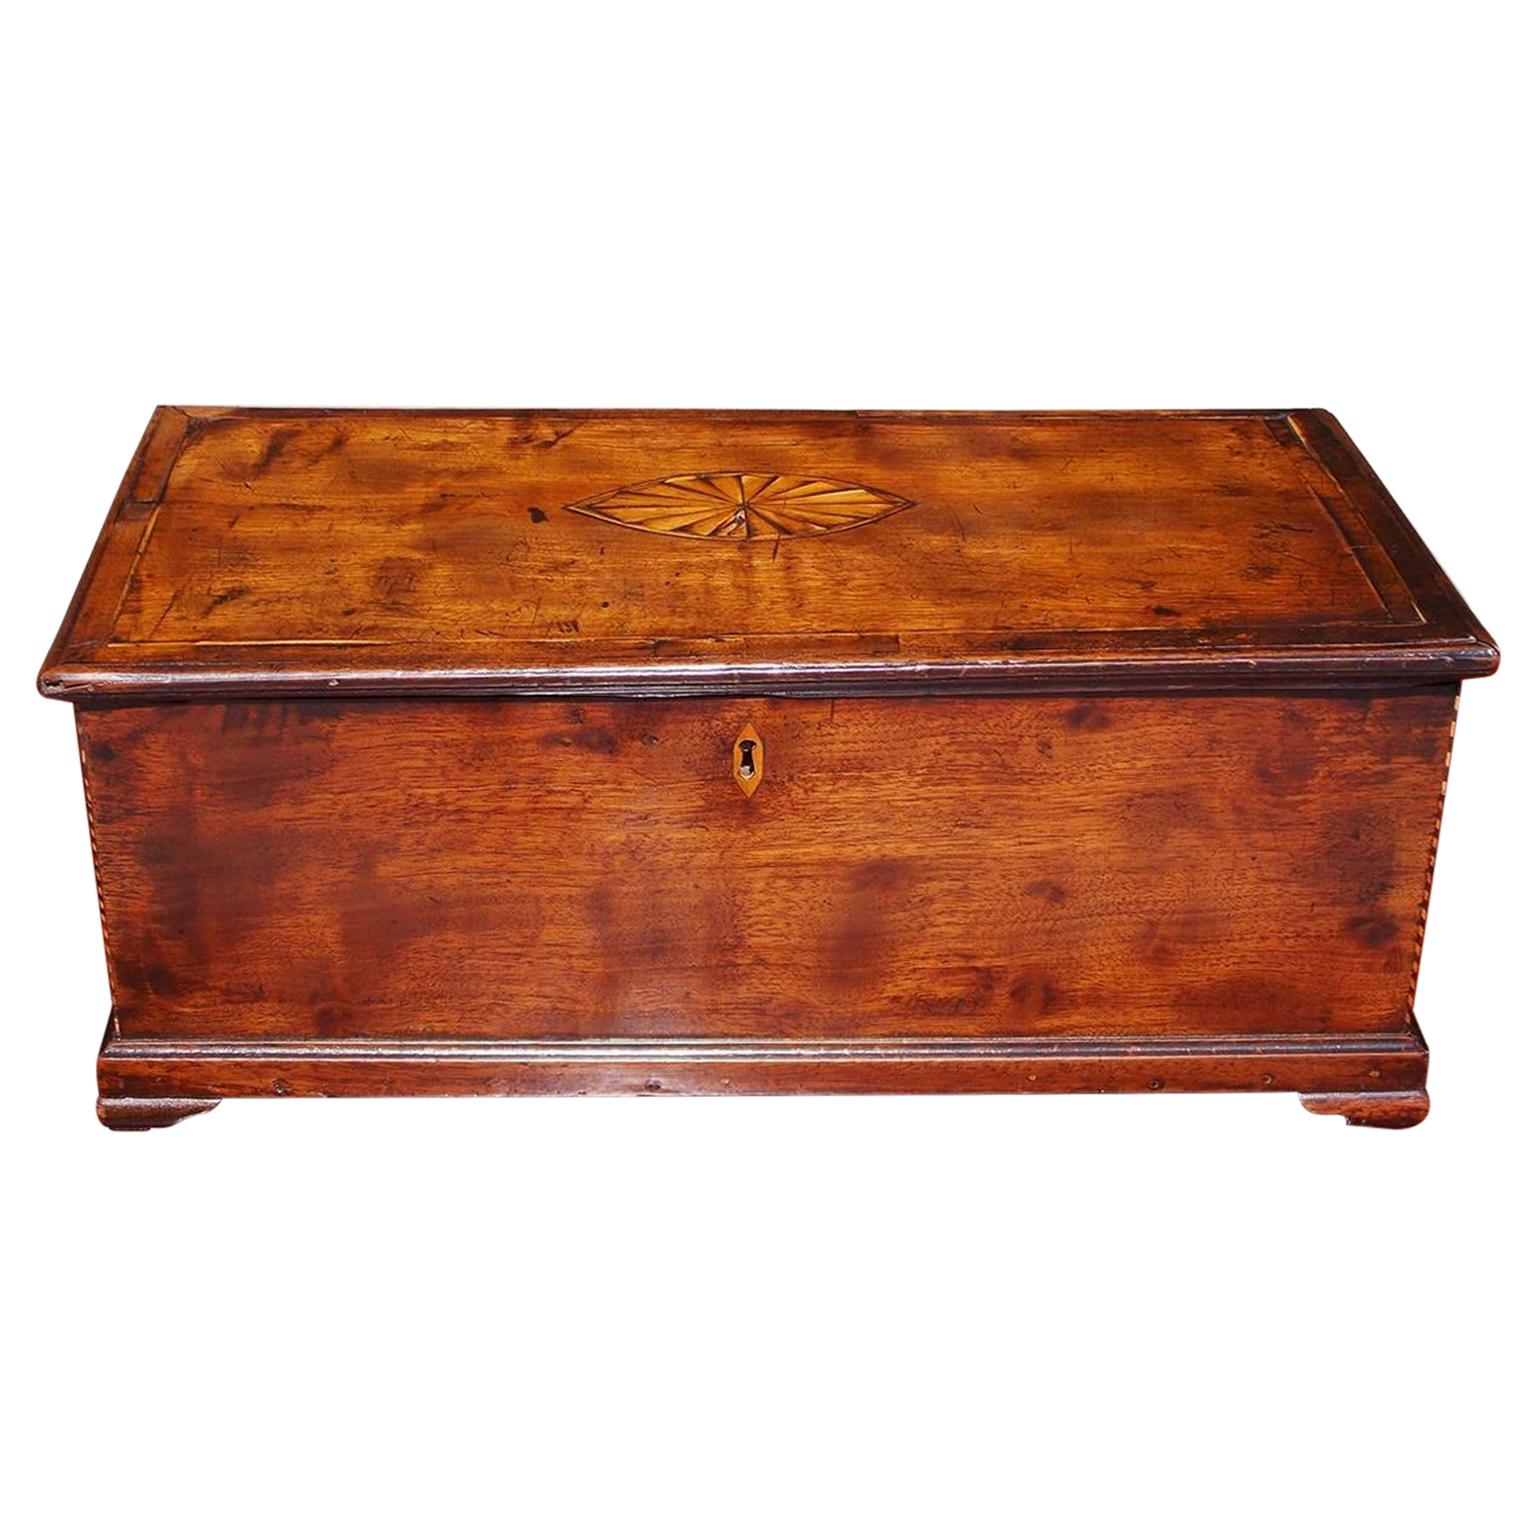 American Walnut Satinwood Inlaid Valuables Box with Original Feet, Circa 1780 For Sale